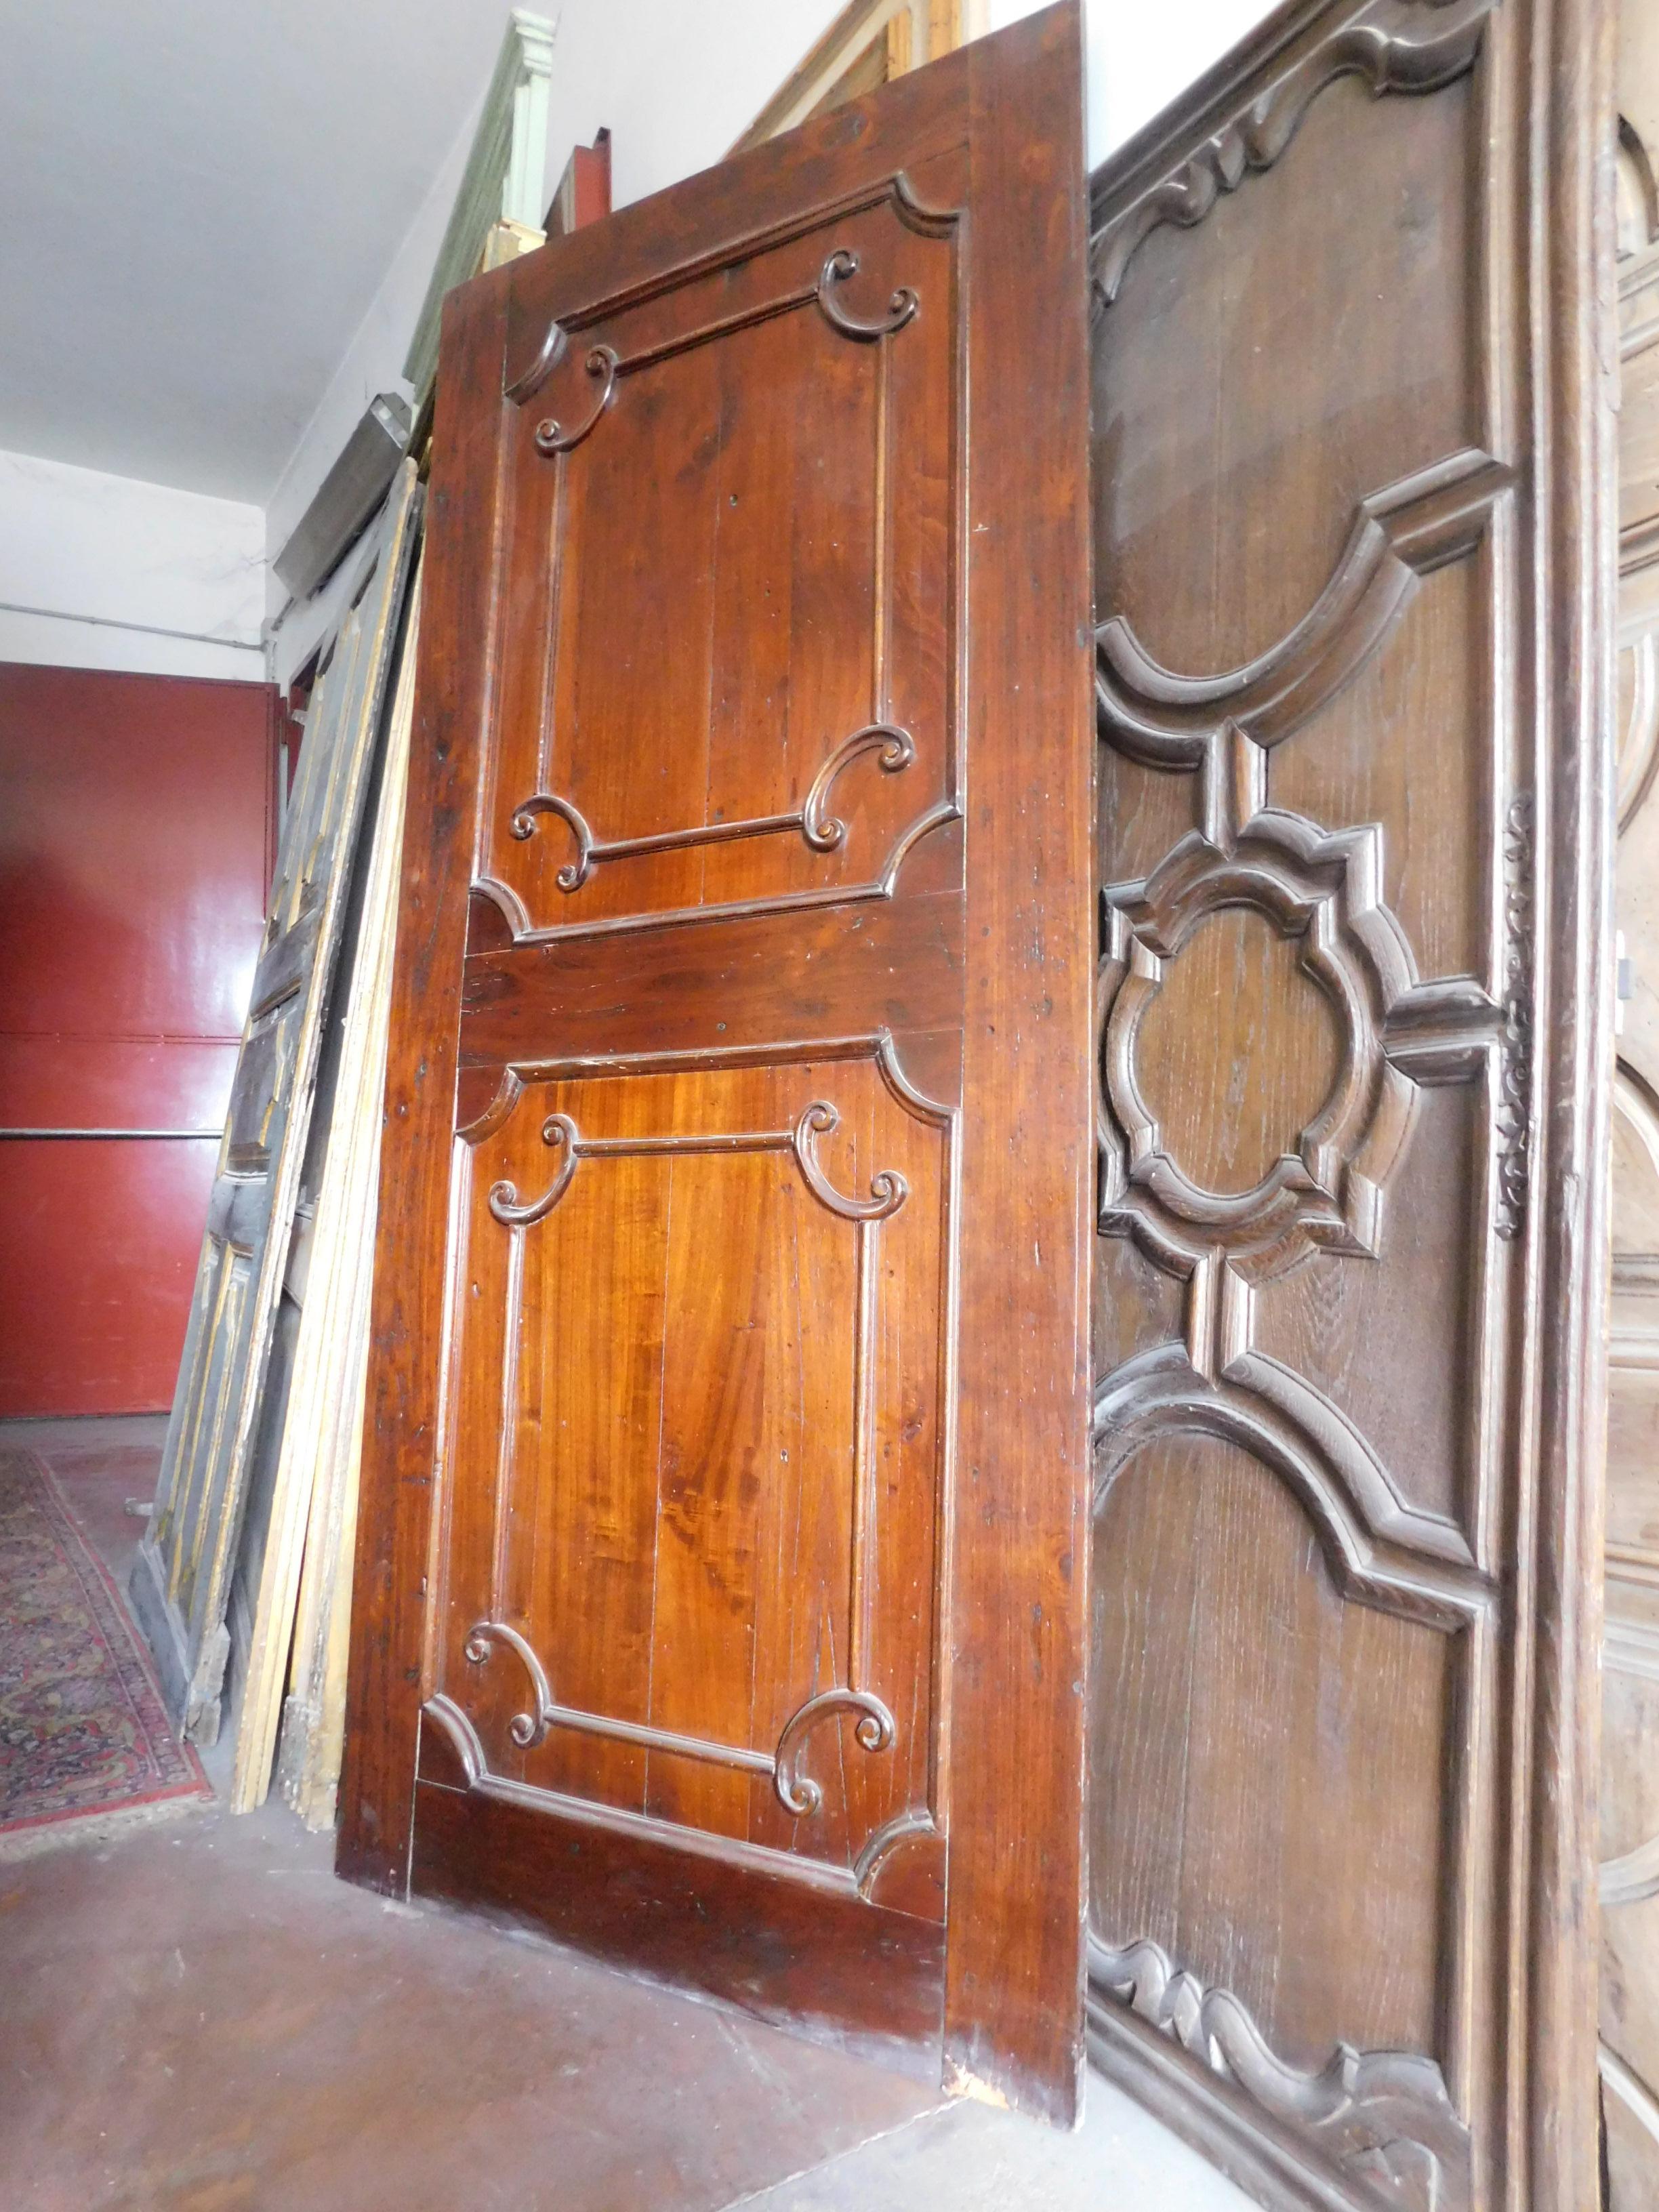 Antique doors of Hotel, is part of a series of 5 identical doors, very thin, they were used as a cover panel for armored doors of the various rooms. they were made in the eighteenth century by craftsmen from Italy, they came from historic hotels in